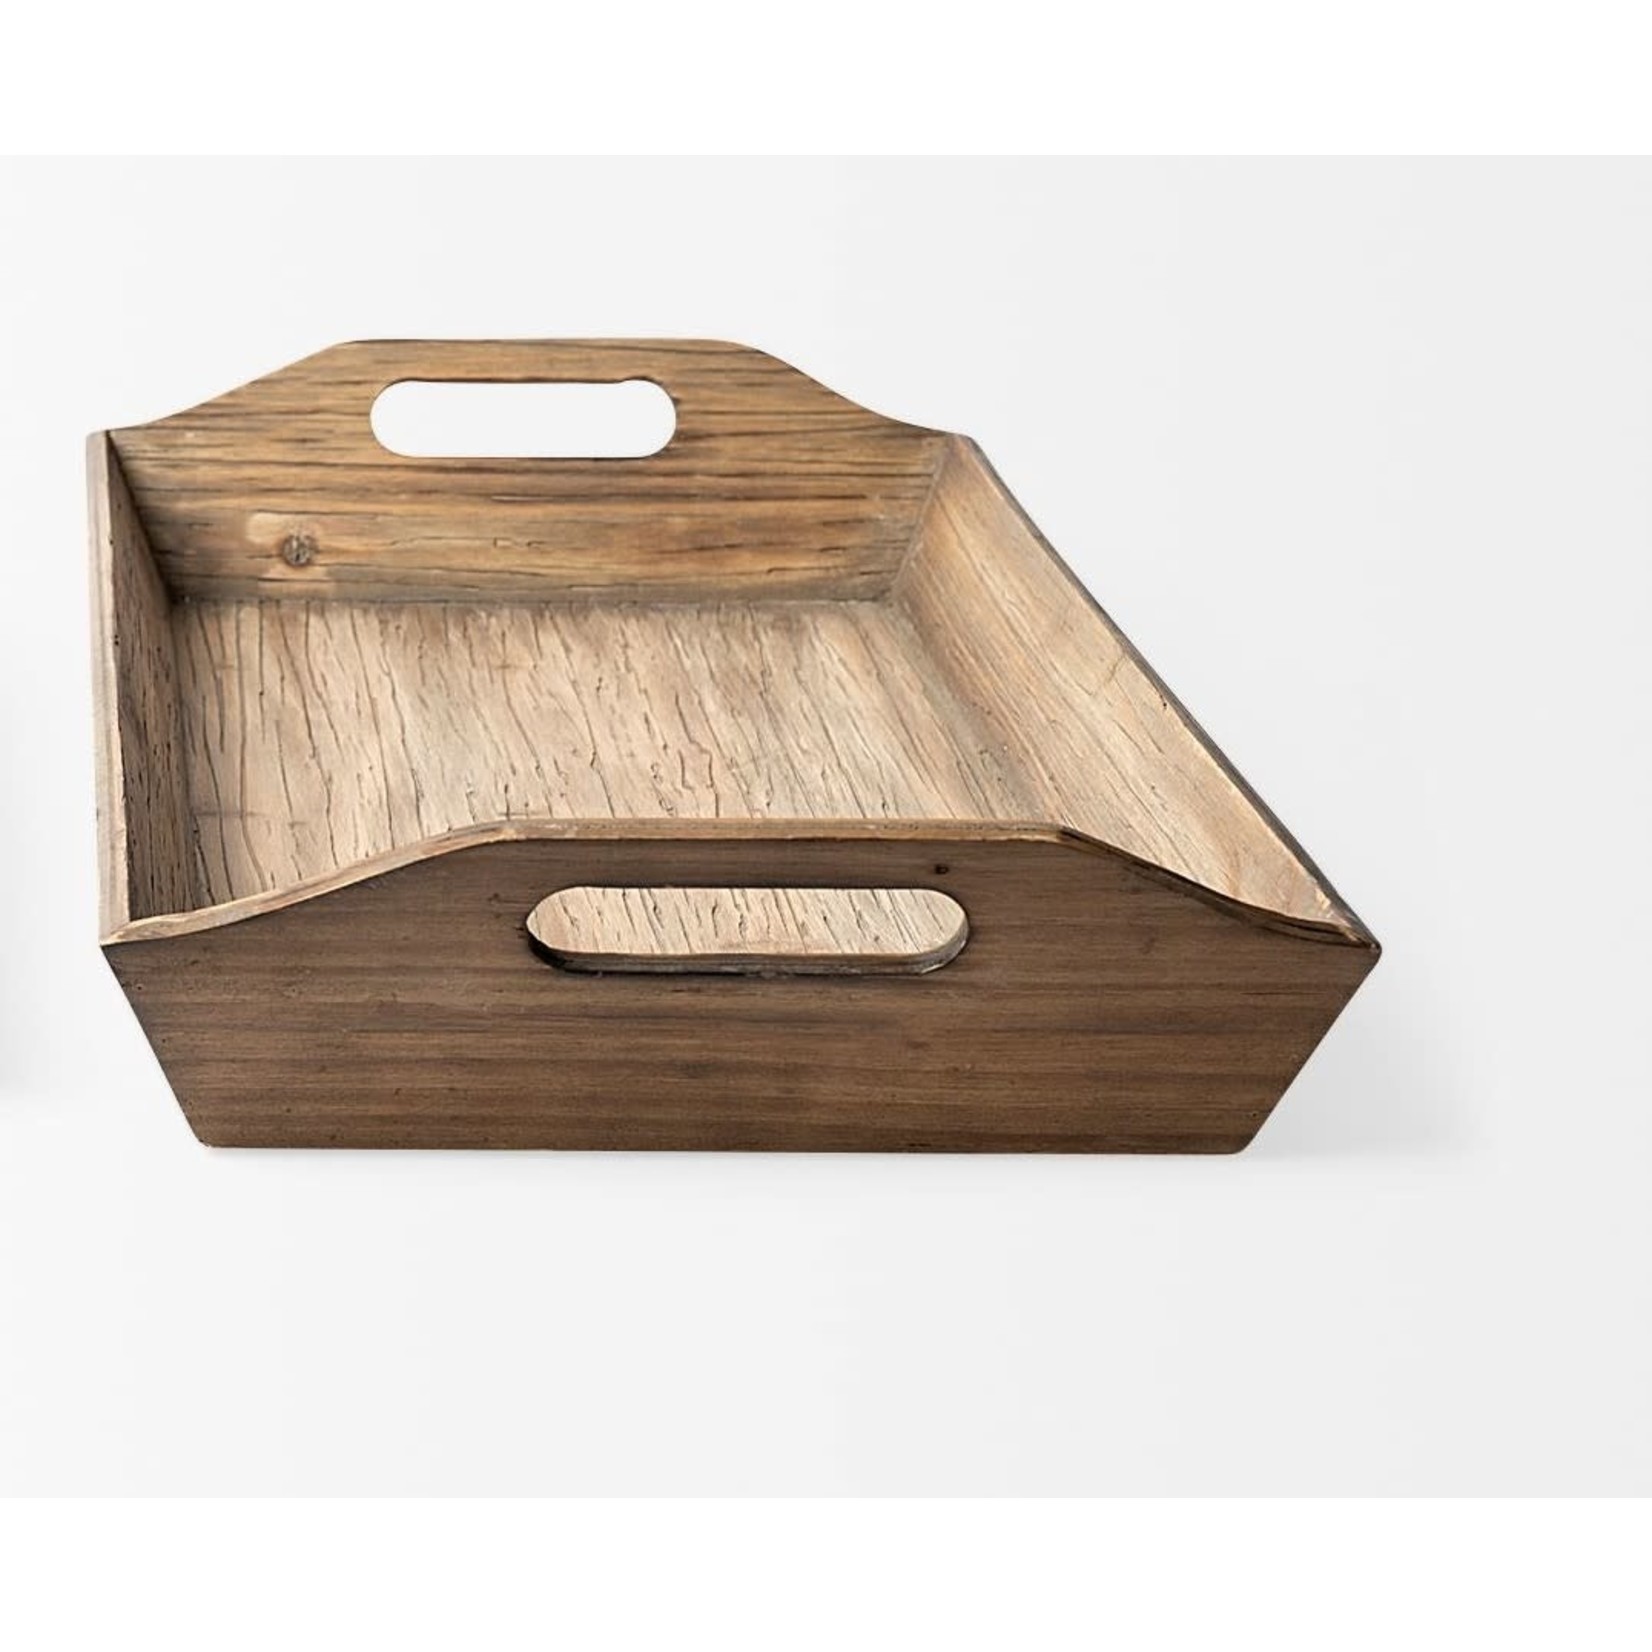 MERCANA TANWY WOODEN TRAY - SMALL